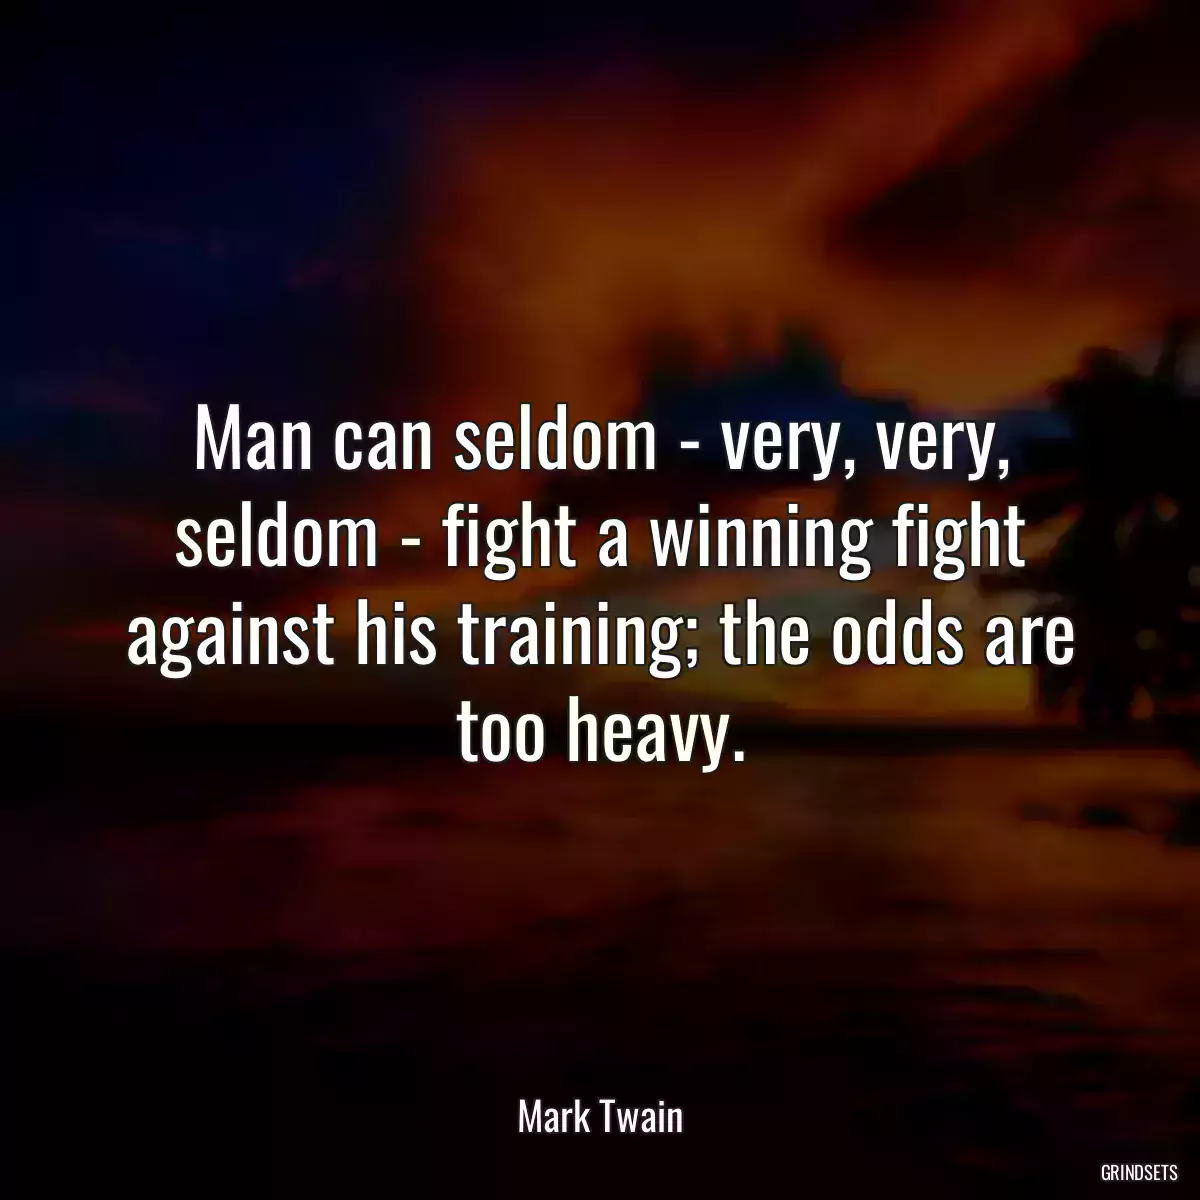 Man can seldom - very, very, seldom - fight a winning fight against his training; the odds are too heavy.